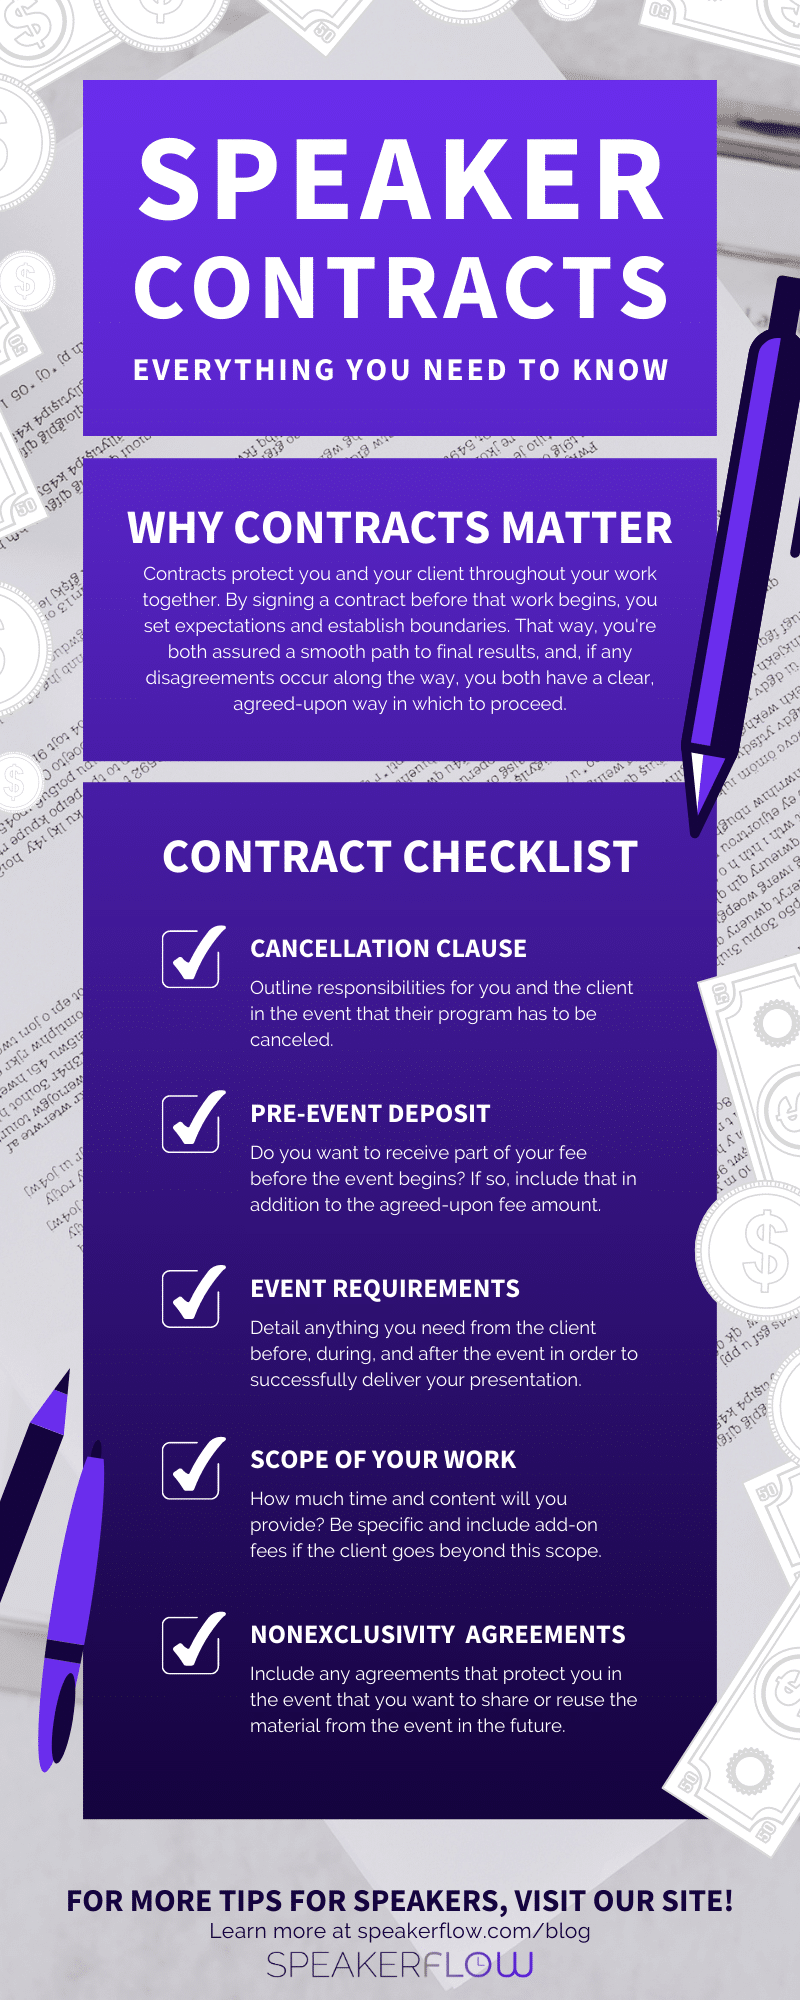 Infographic for Speaker Contracts Everything You Need To Know - SpeakerFlow